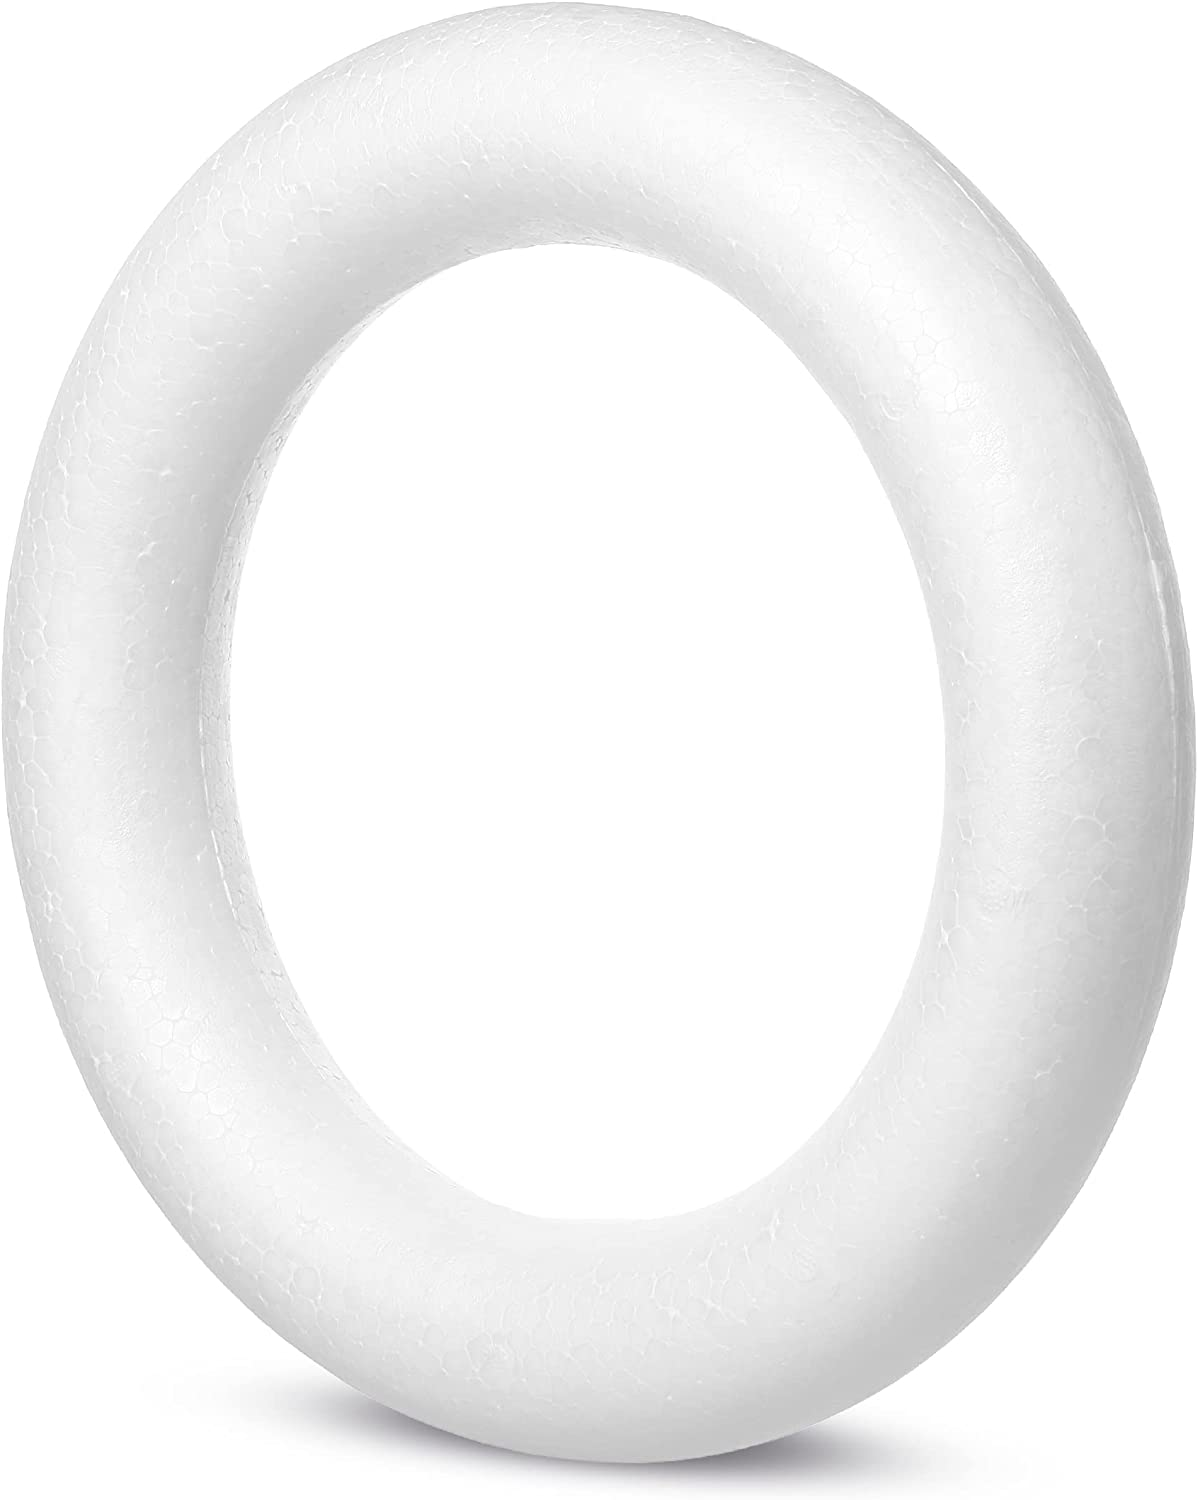 MAHIONG 8 Pack 8 Inch Craft Foam Wreath, White Polystyrene Foam Circles  Ring, Round Foam Wreath Form for Crafts DIY Arts Floral Projects Home  Wedding